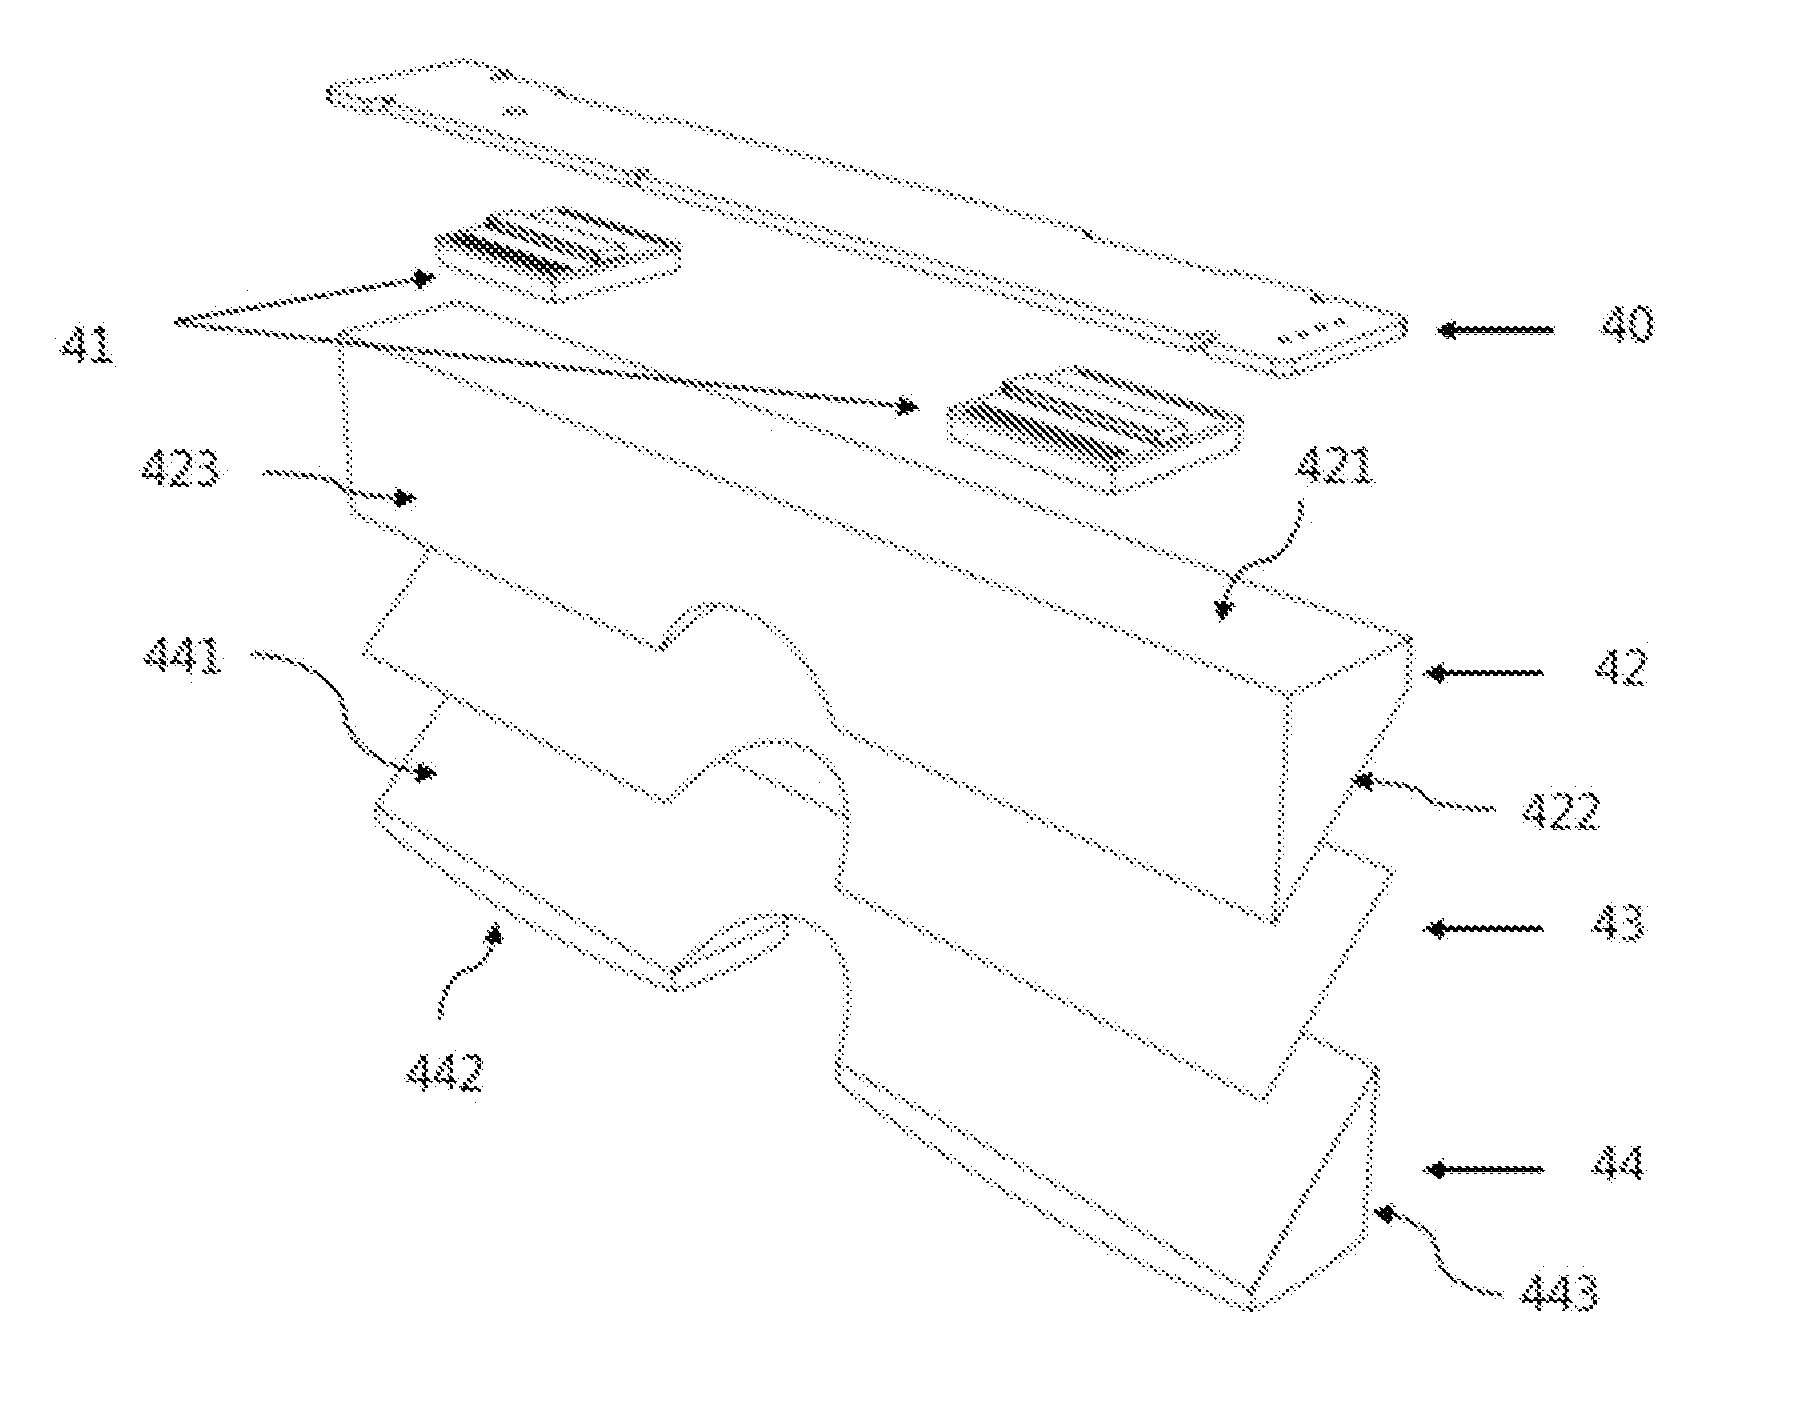 See-through display device capable of ensuring ambient field-of-view